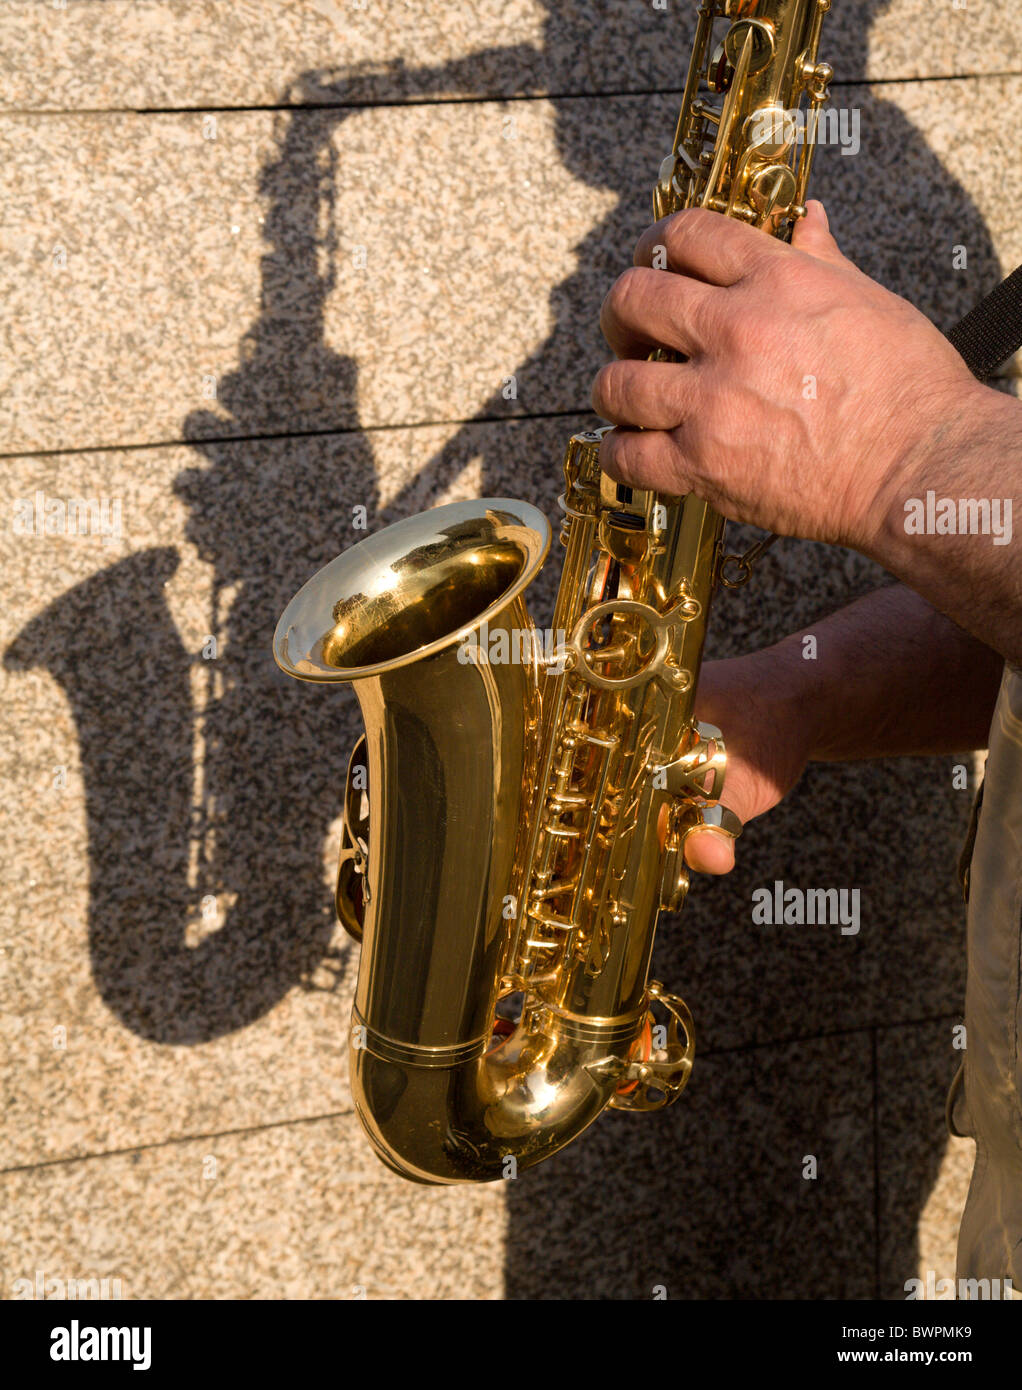 hands of saxophone player Stock Photo - Alamy